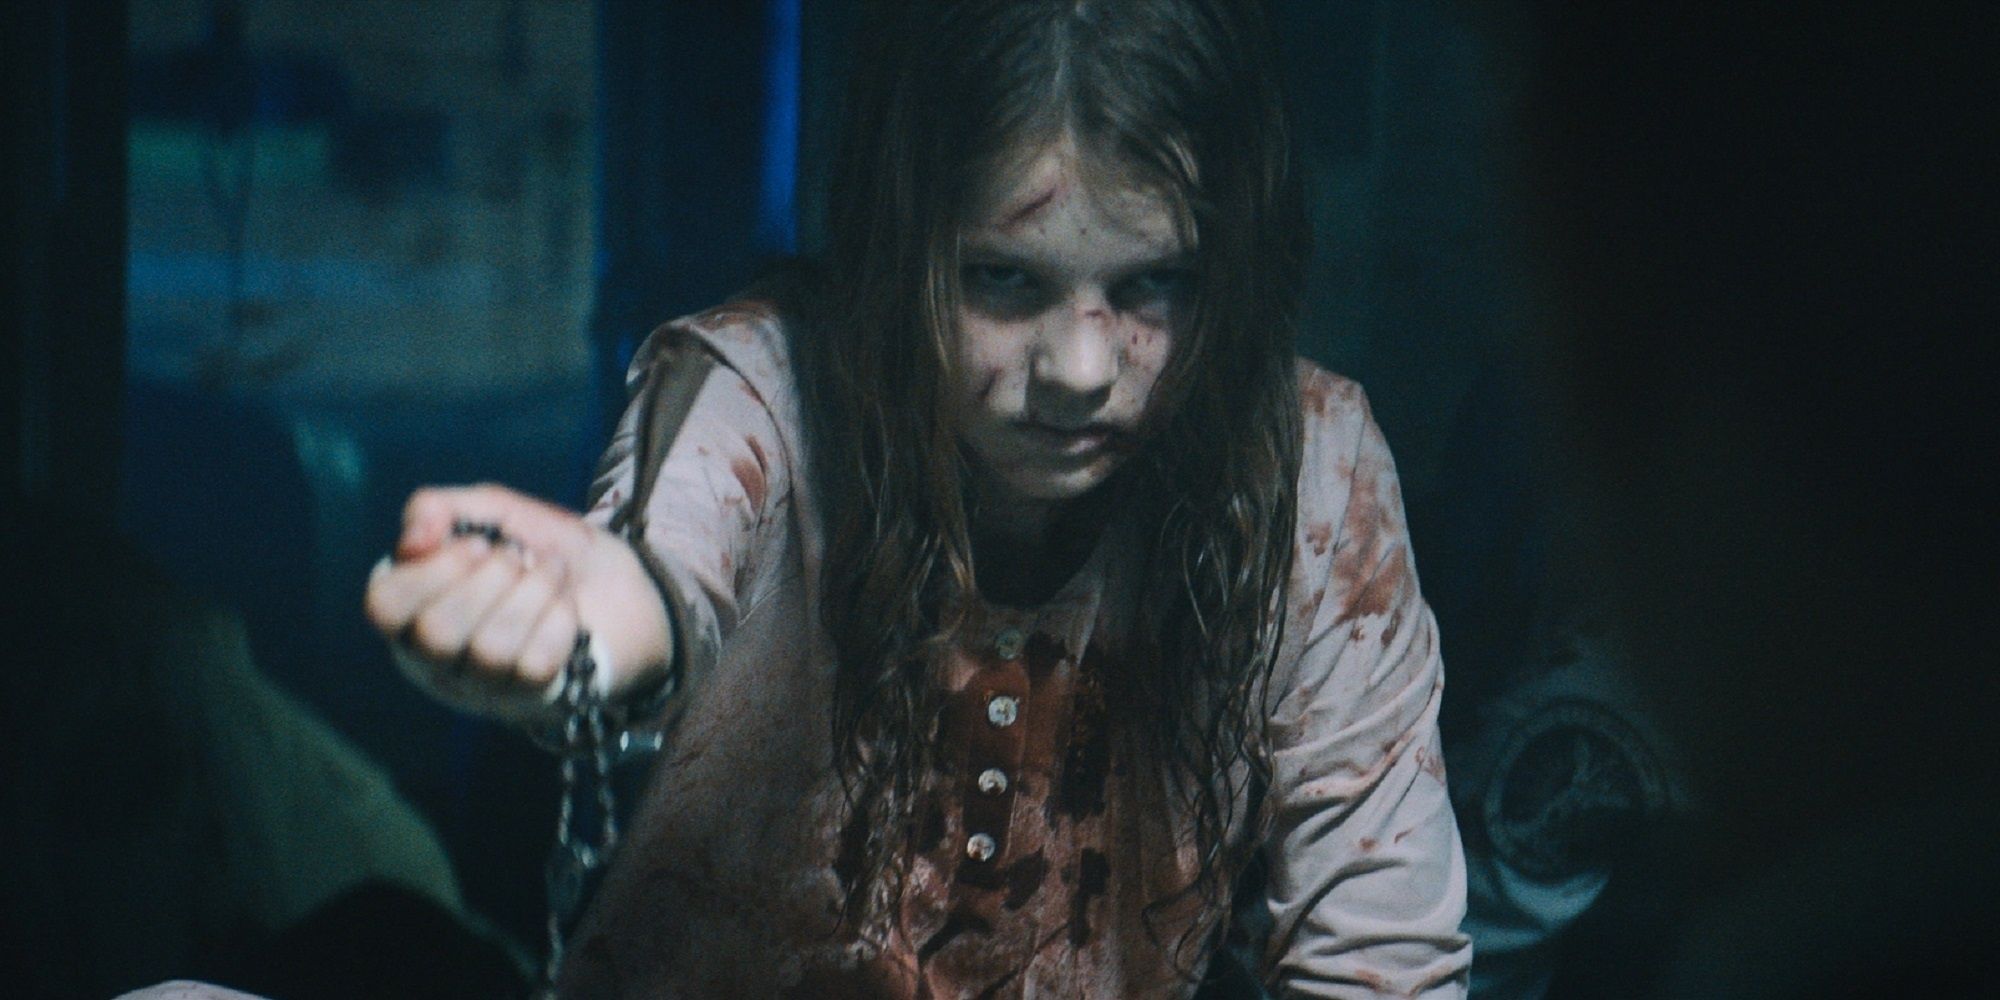 A little girl bloodied and bruised carrying a rosary in 'Prey for the Devil.'